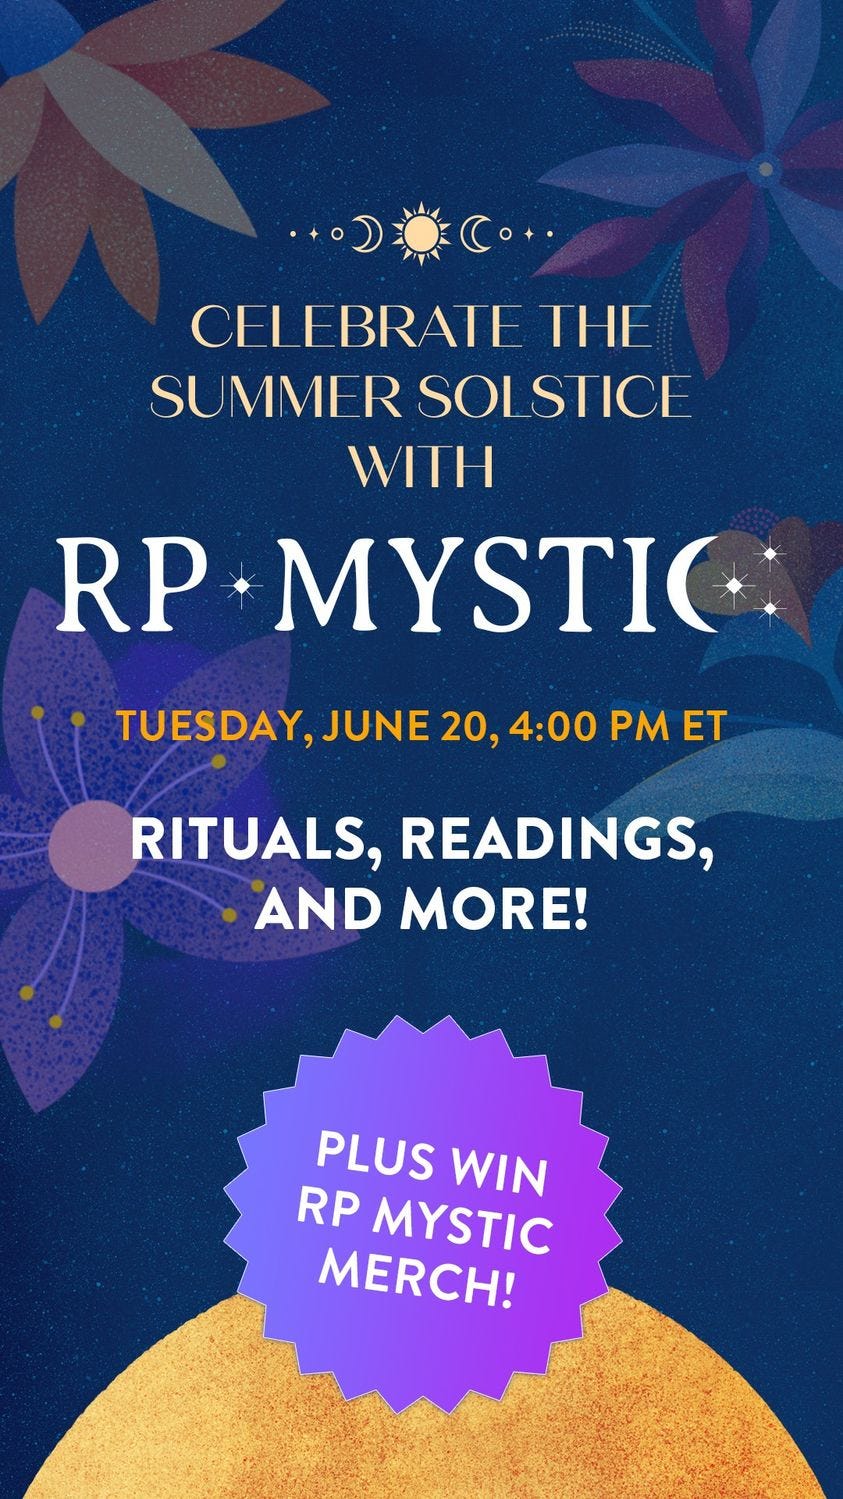 May be an image of text that says 'CELEBRATE THE SU MMER SOI STICE WITH RP MYSTIC TUESDAY, JUNE 20, 4:00 PM ET RITUALS, READINGS, AND MORE! PLUS WIN RP MYSTIC MERCH!'